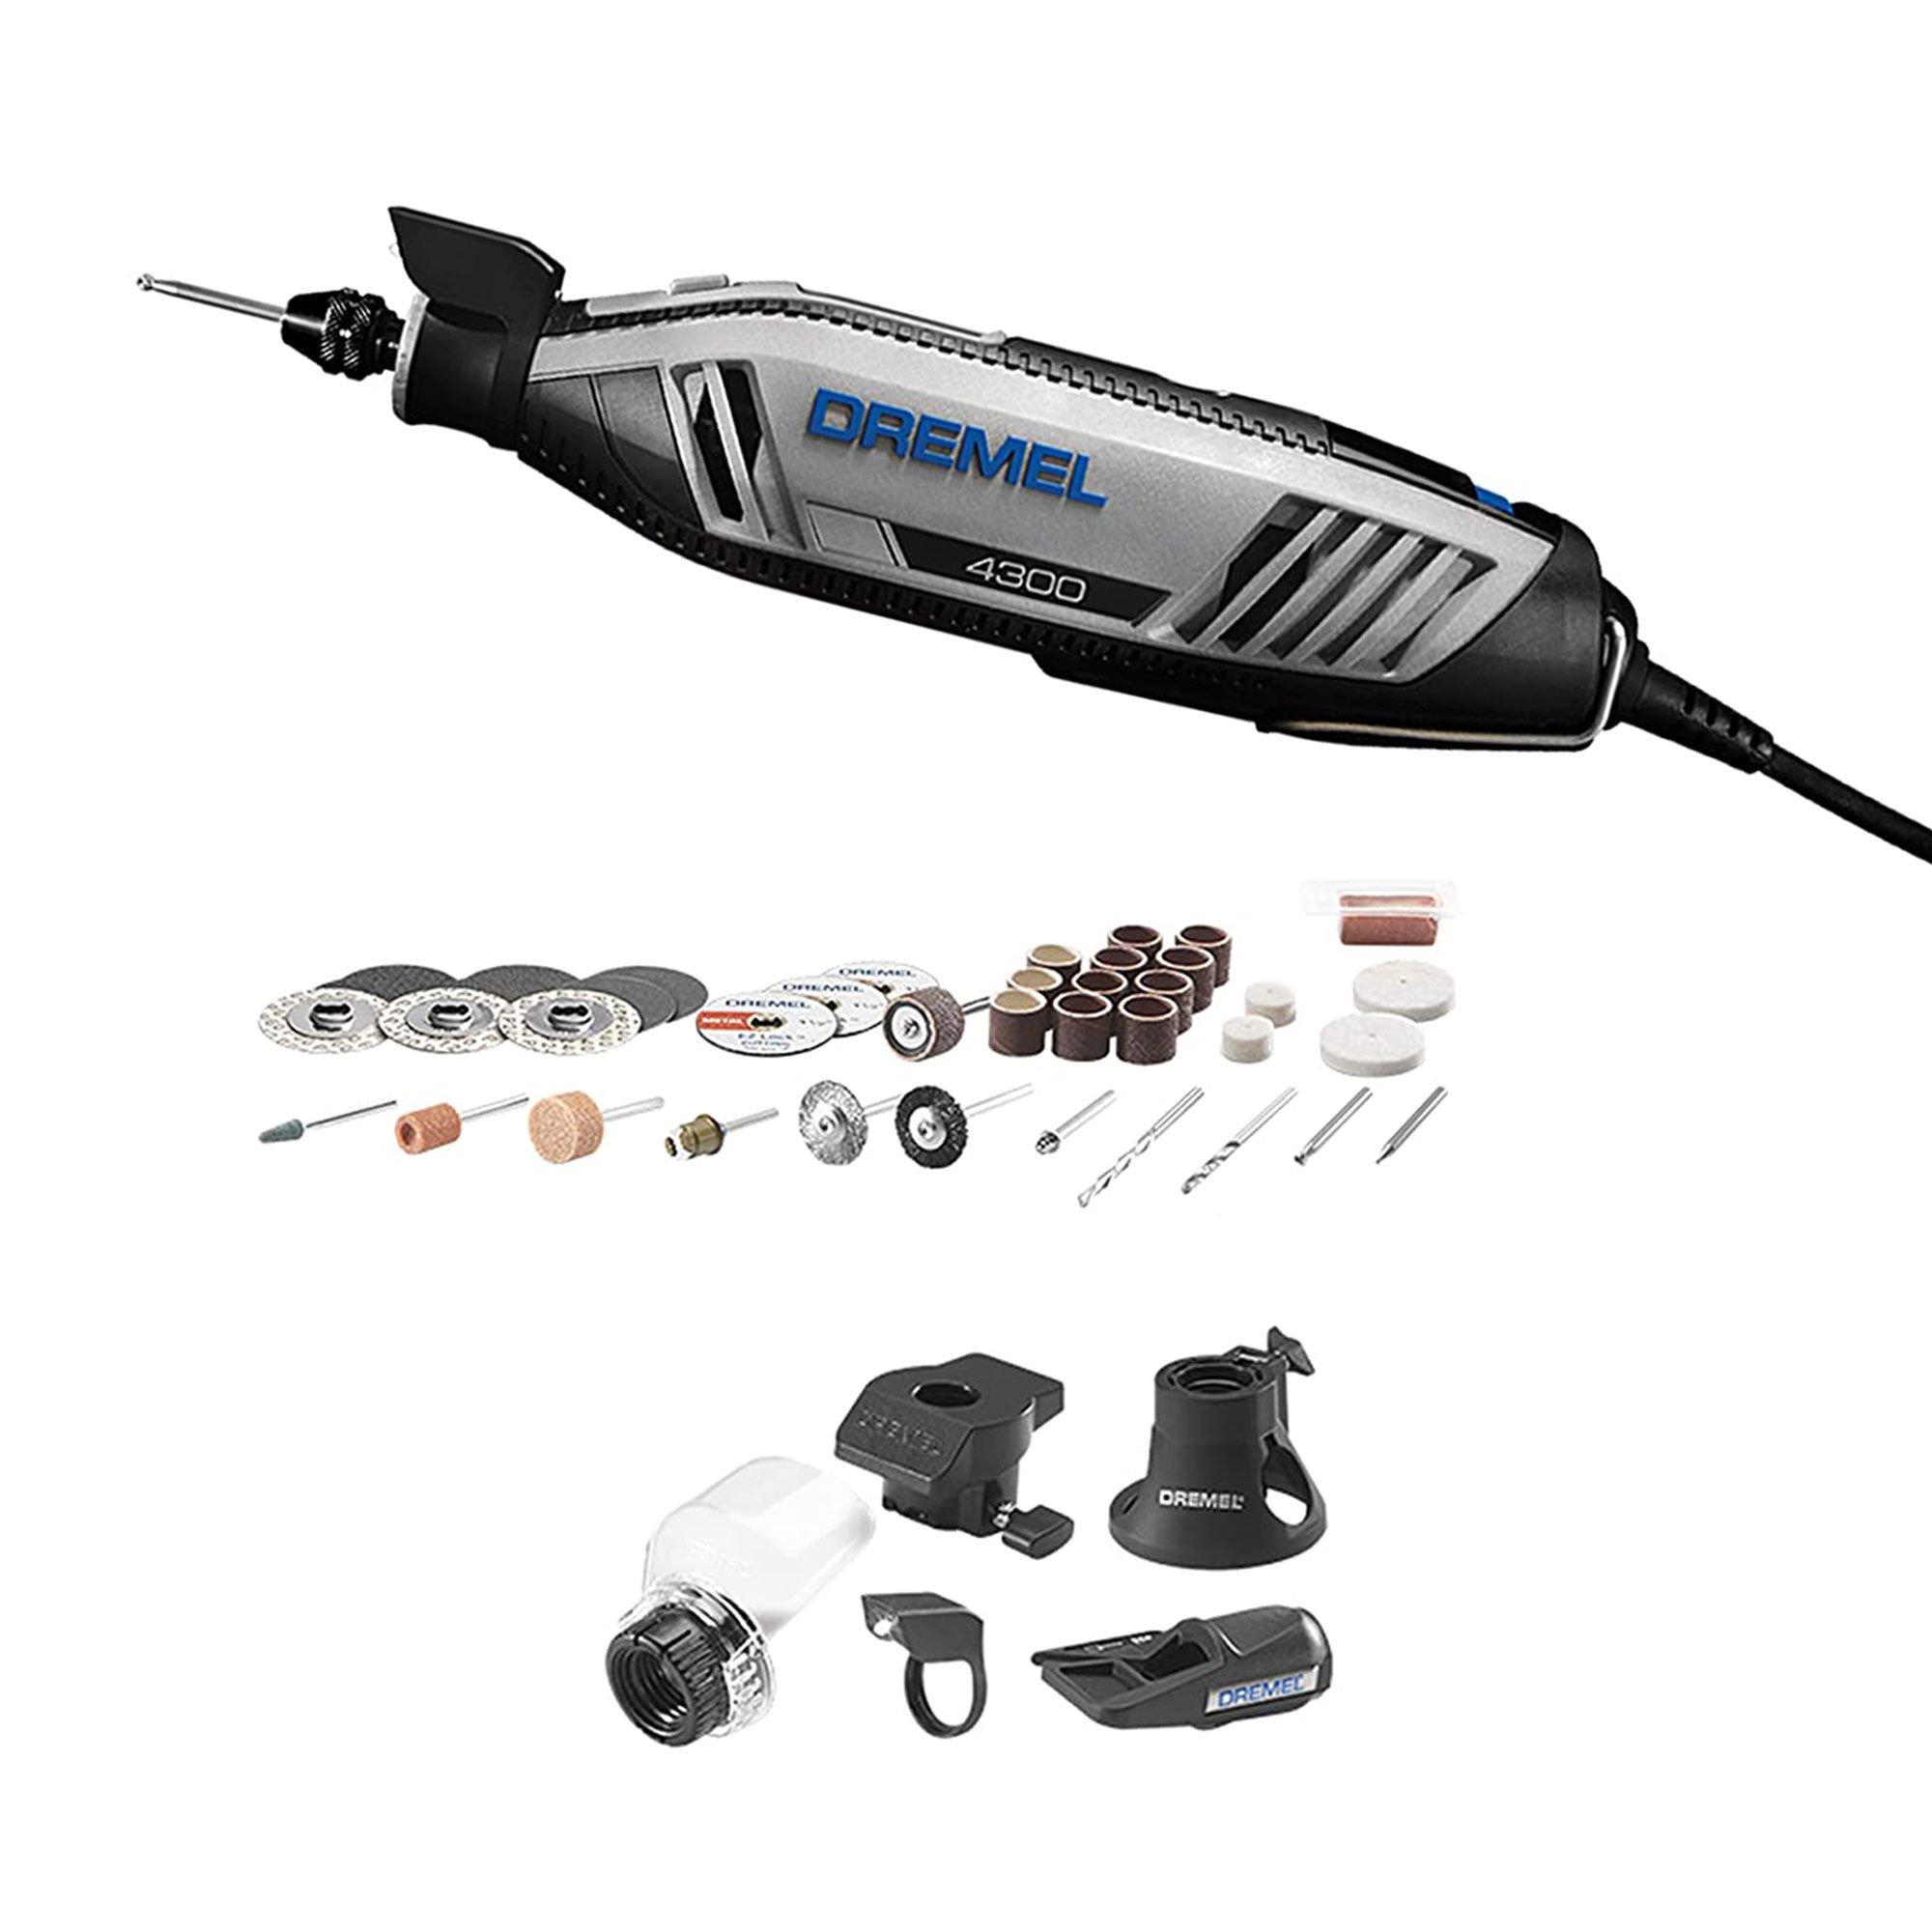 Dremel 4300-5/40 High Performance Rotary Tool Kit with LED Light- 5  Attachments & 40 Accessories- Engraver, Sander, and Polisher